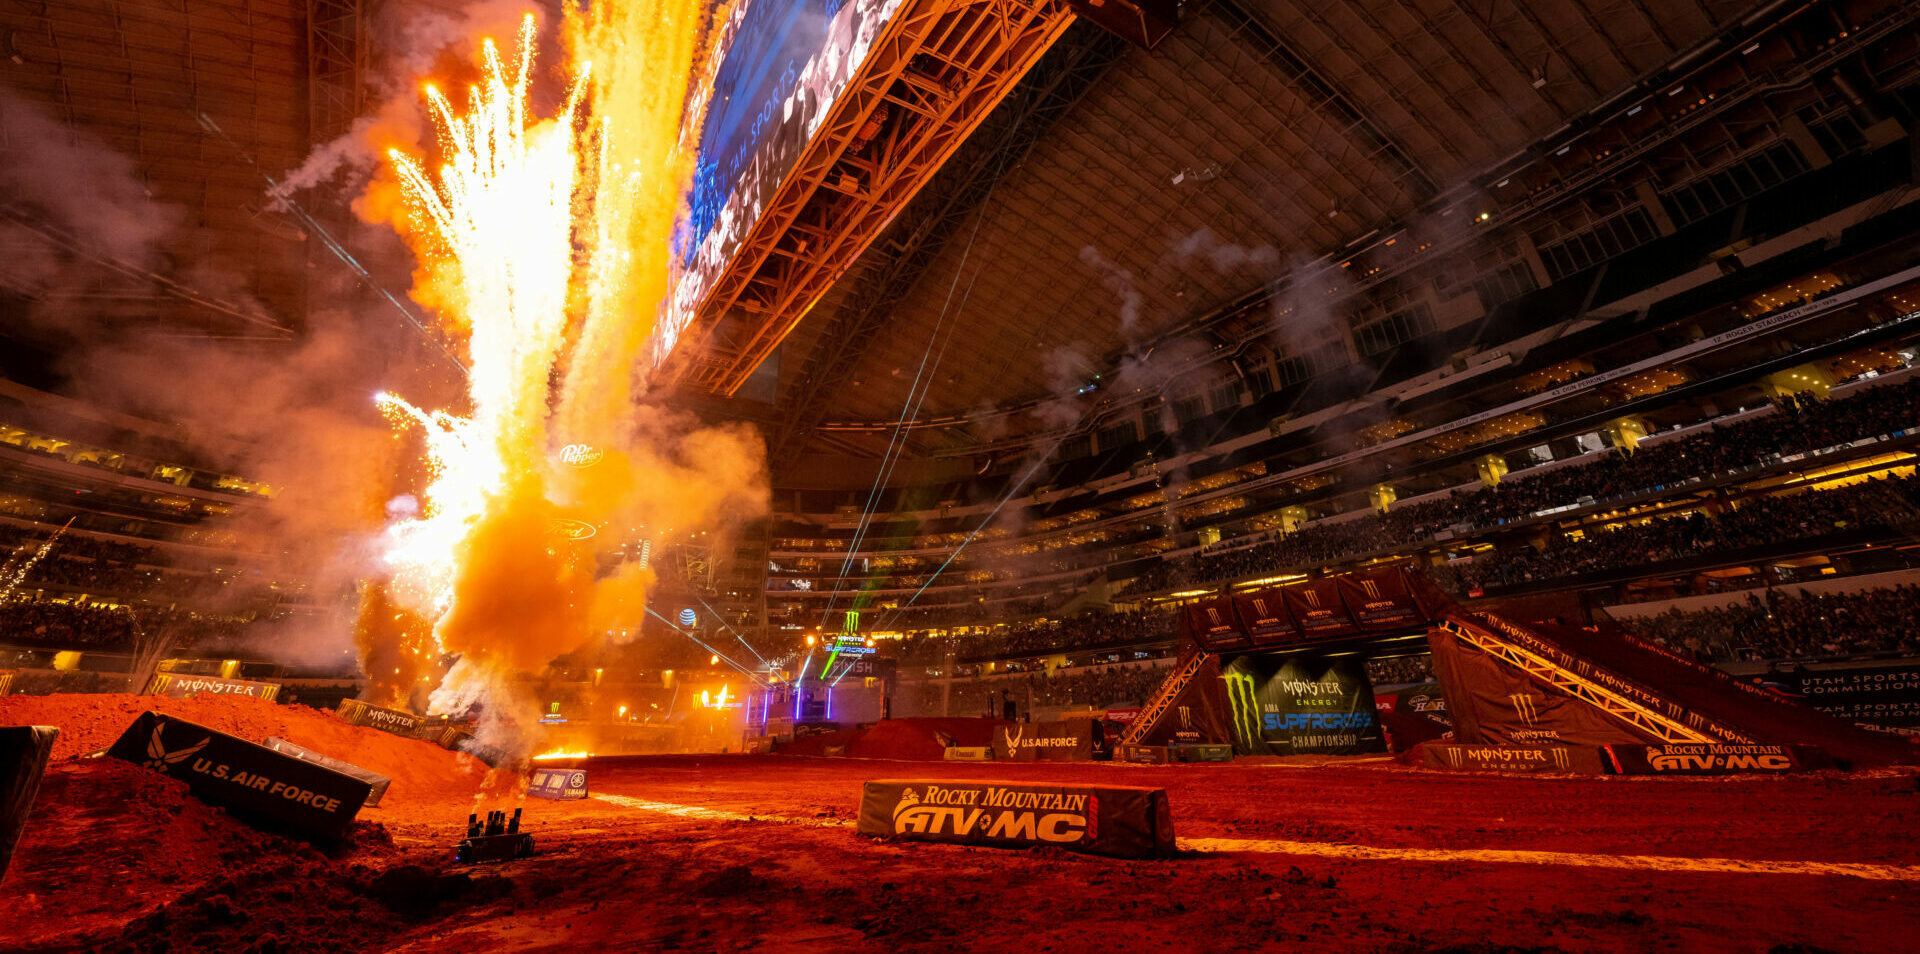 Texas race fans enjoyed the 43rd year of a Supercross event in the Arlington/Dallas metro area. They saw Cooper Webb become the winningest rider in the city's history with five victories at the venue. Photo courtesy Feld Motor Sports, Inc.